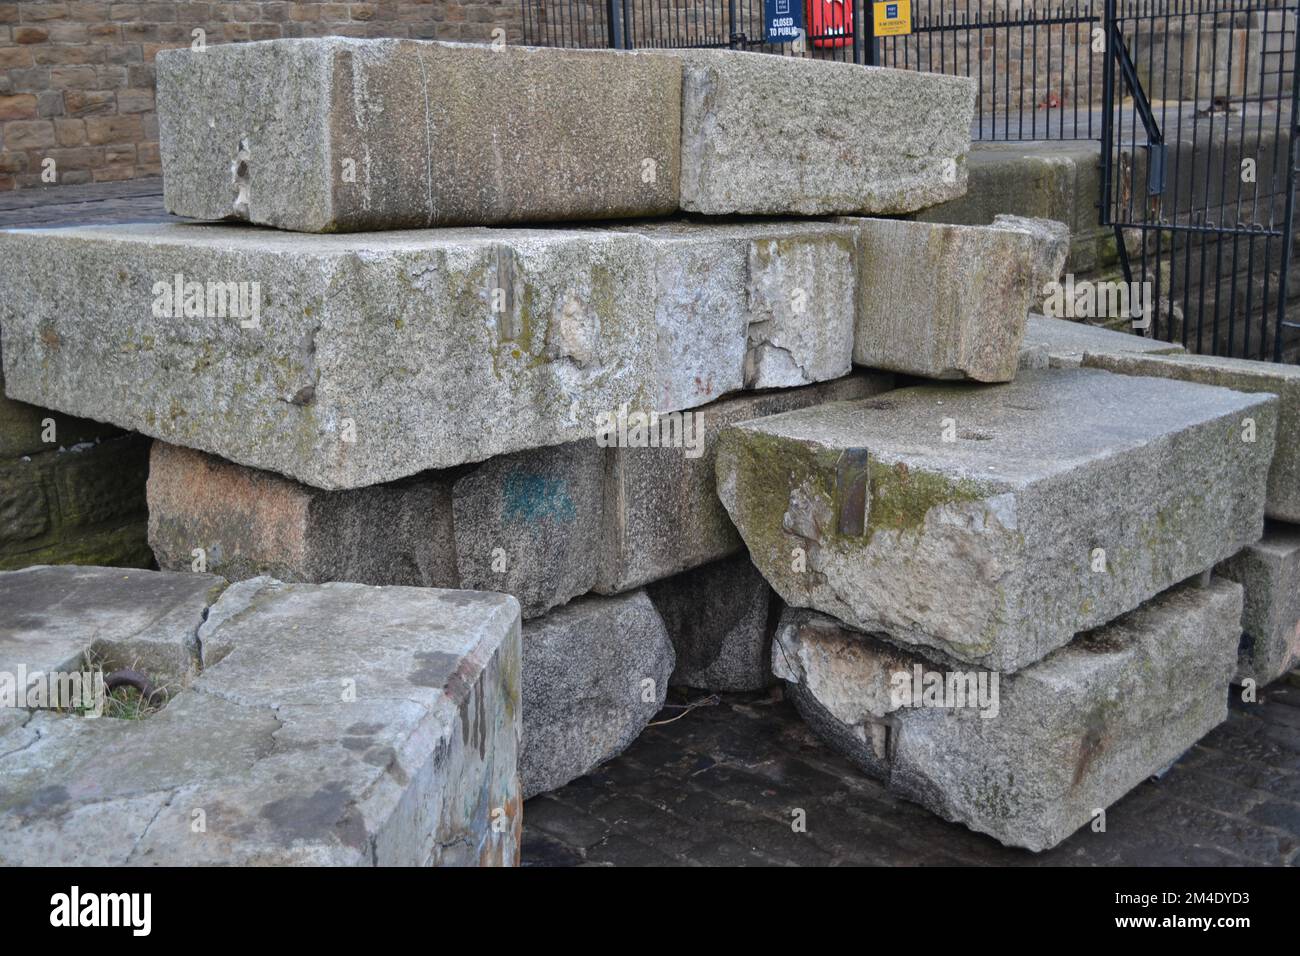 Large stack of Concrete building blocks at the base of the North Pier in  Tynemouth. Stock Photo